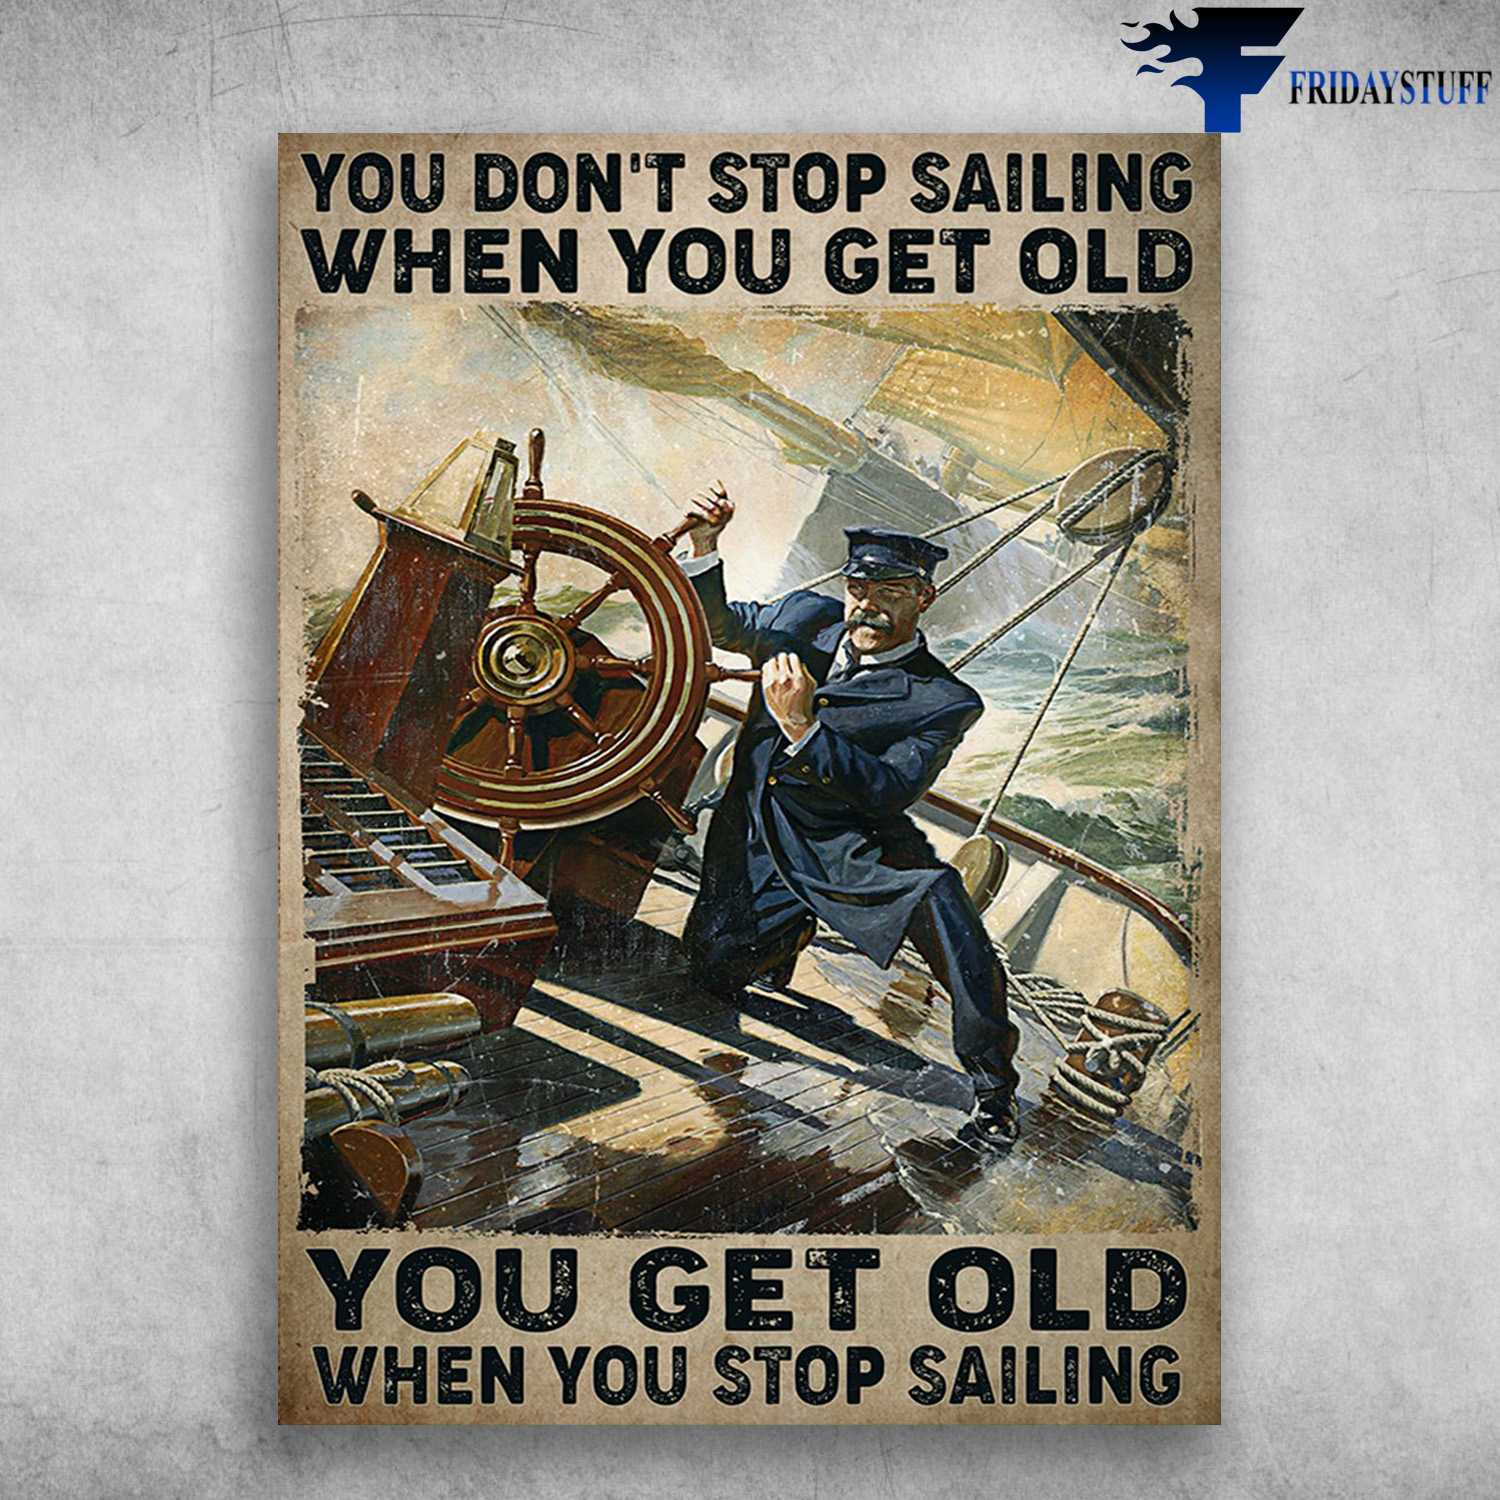 Old Sailor - You Don't Stop Sailing When You Get Old, You Get Old When You Stop Sailing